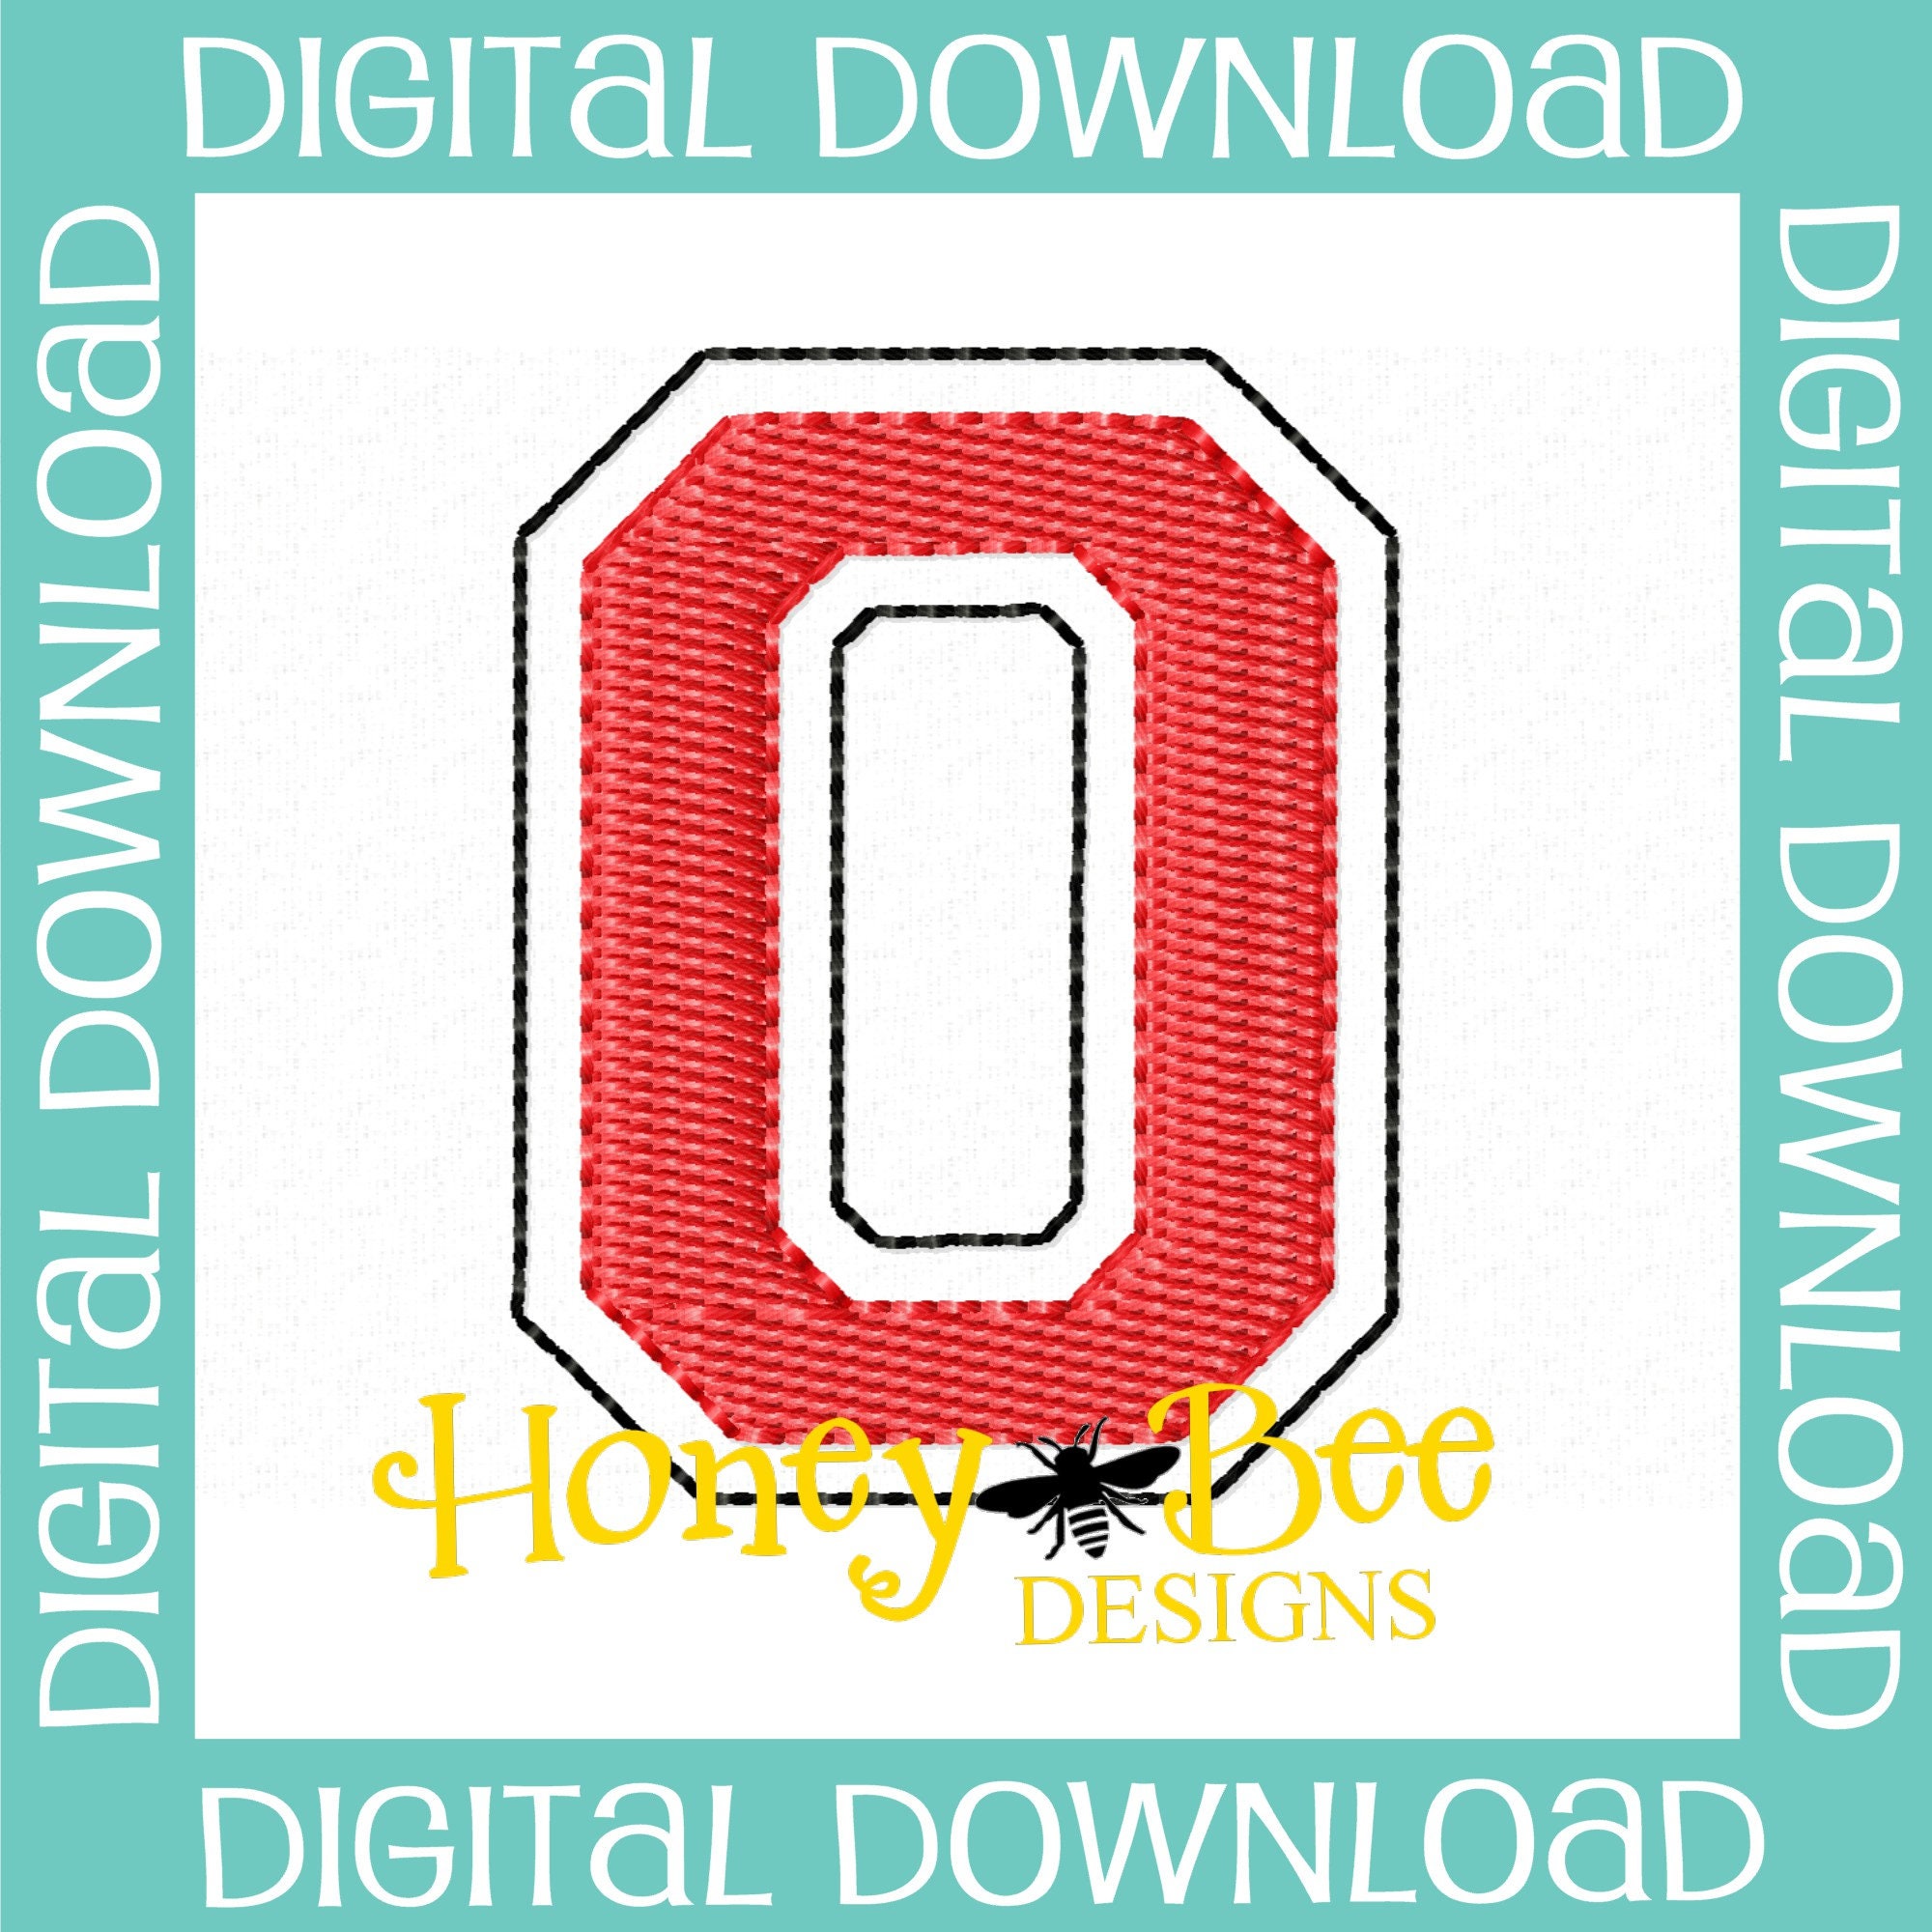 Ohio State College Lines Embossed Red Crew